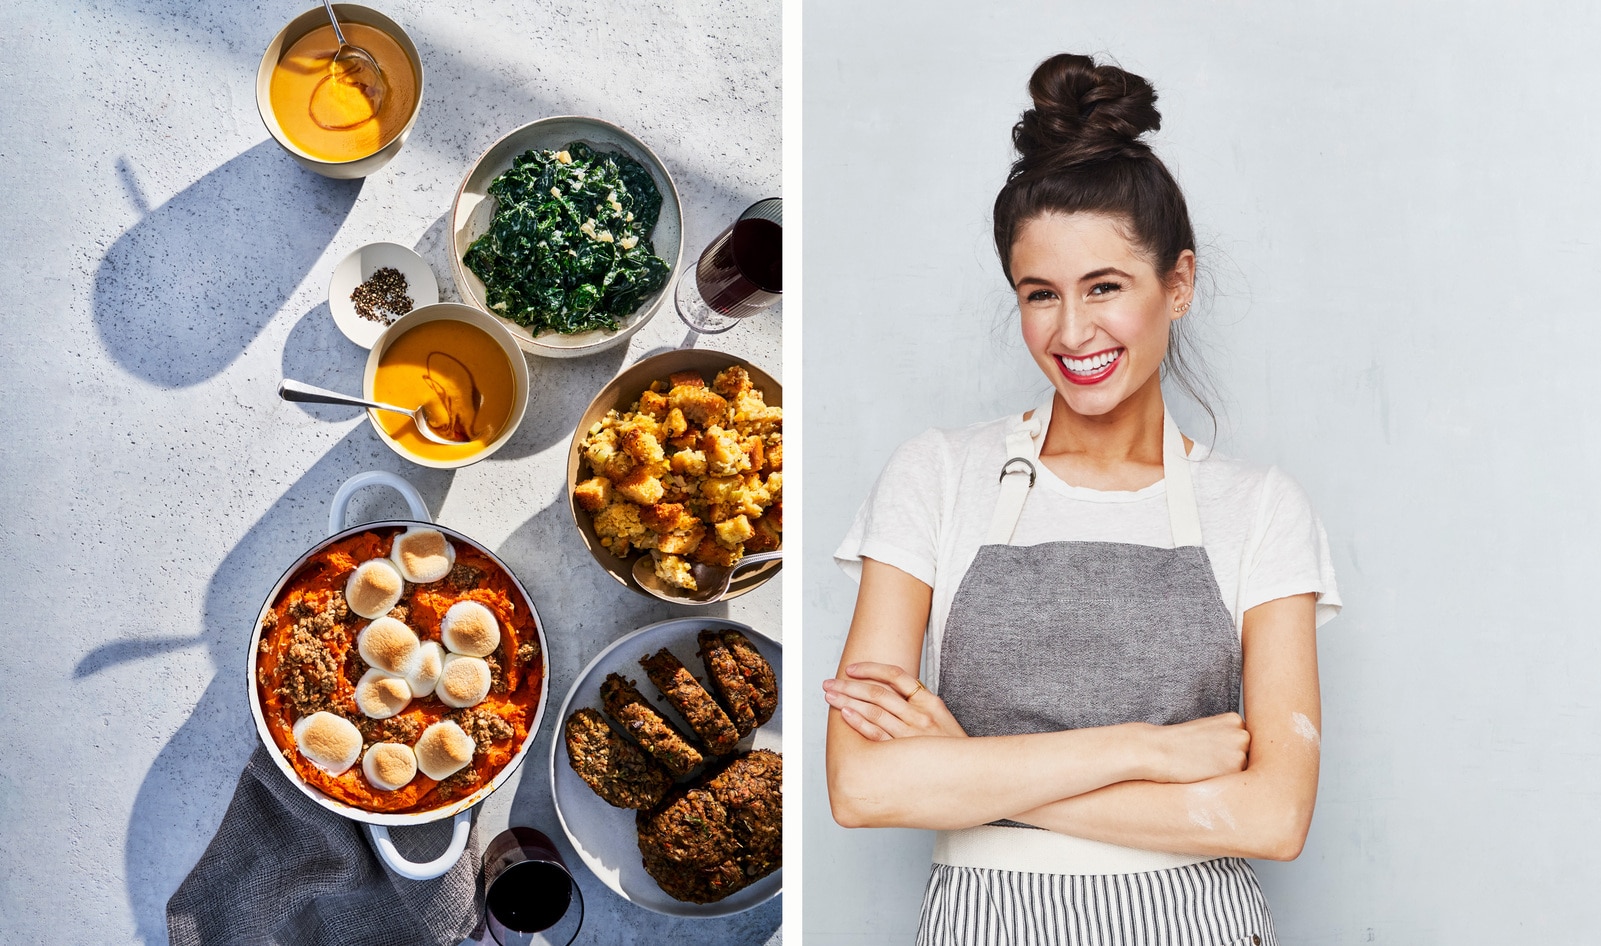 Chef Chloe Coscarelli Partners With Whole Foods Market to Offer Vegan Thanksgiving Meal